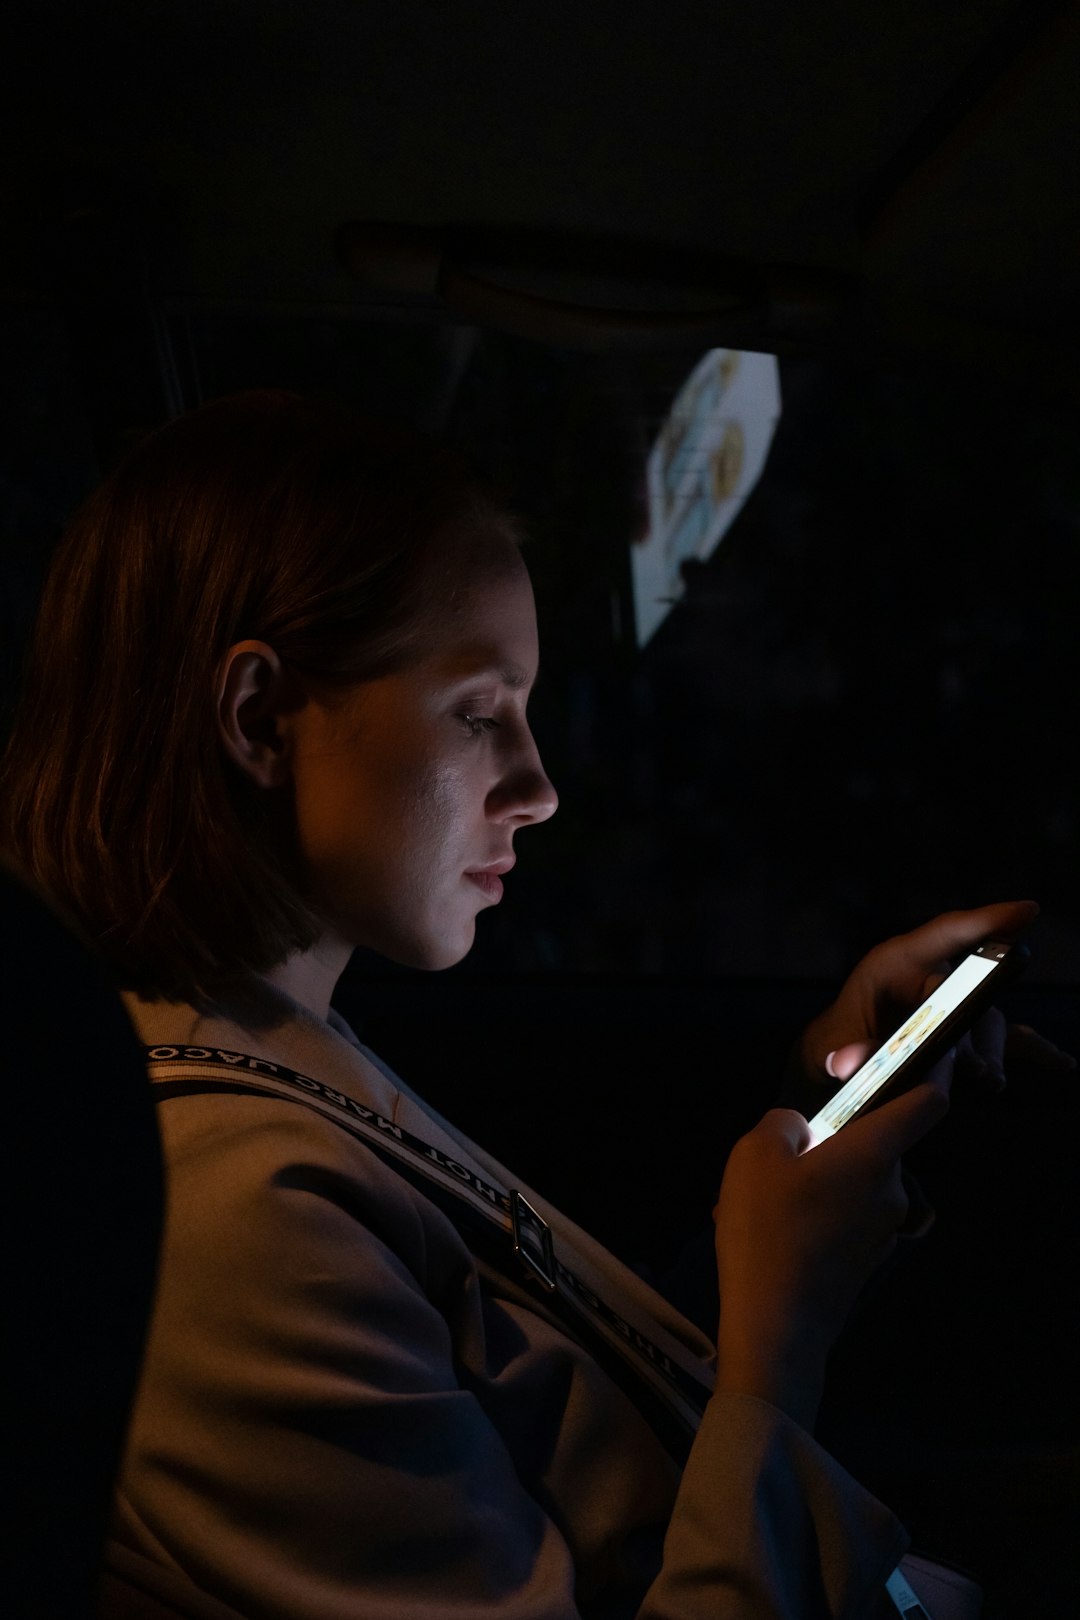 woman in black shirt holding smartphone